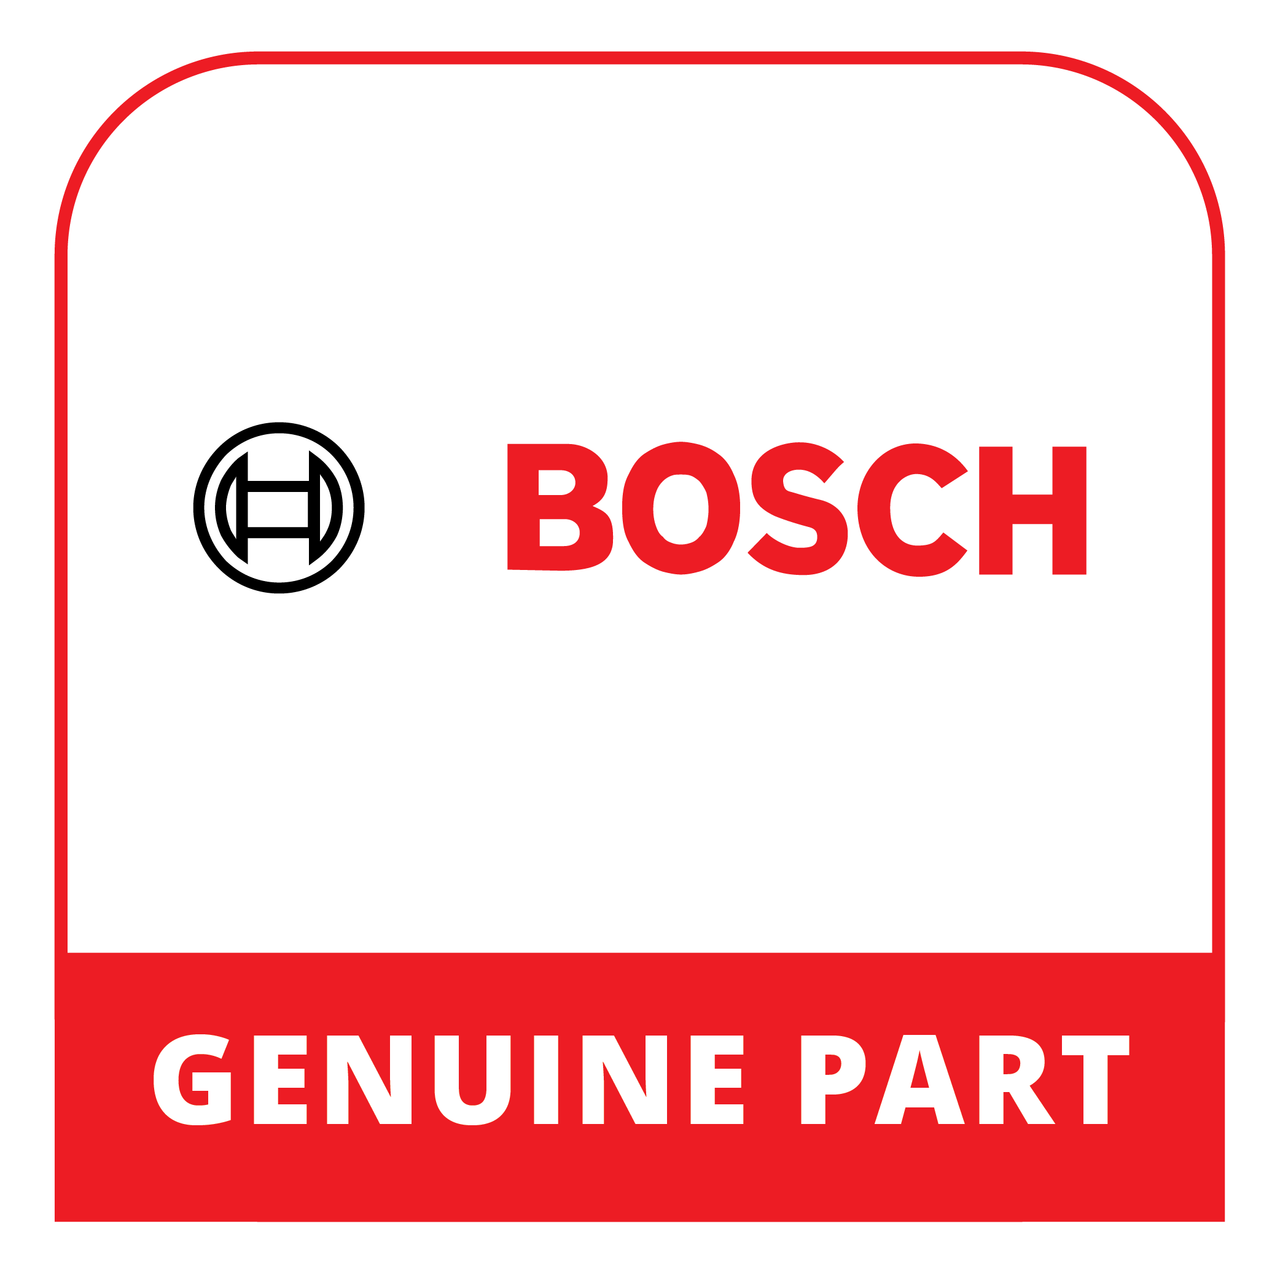 Bosch 18011667 - Instruction Manual - Genuine Bosch (Thermador) Part